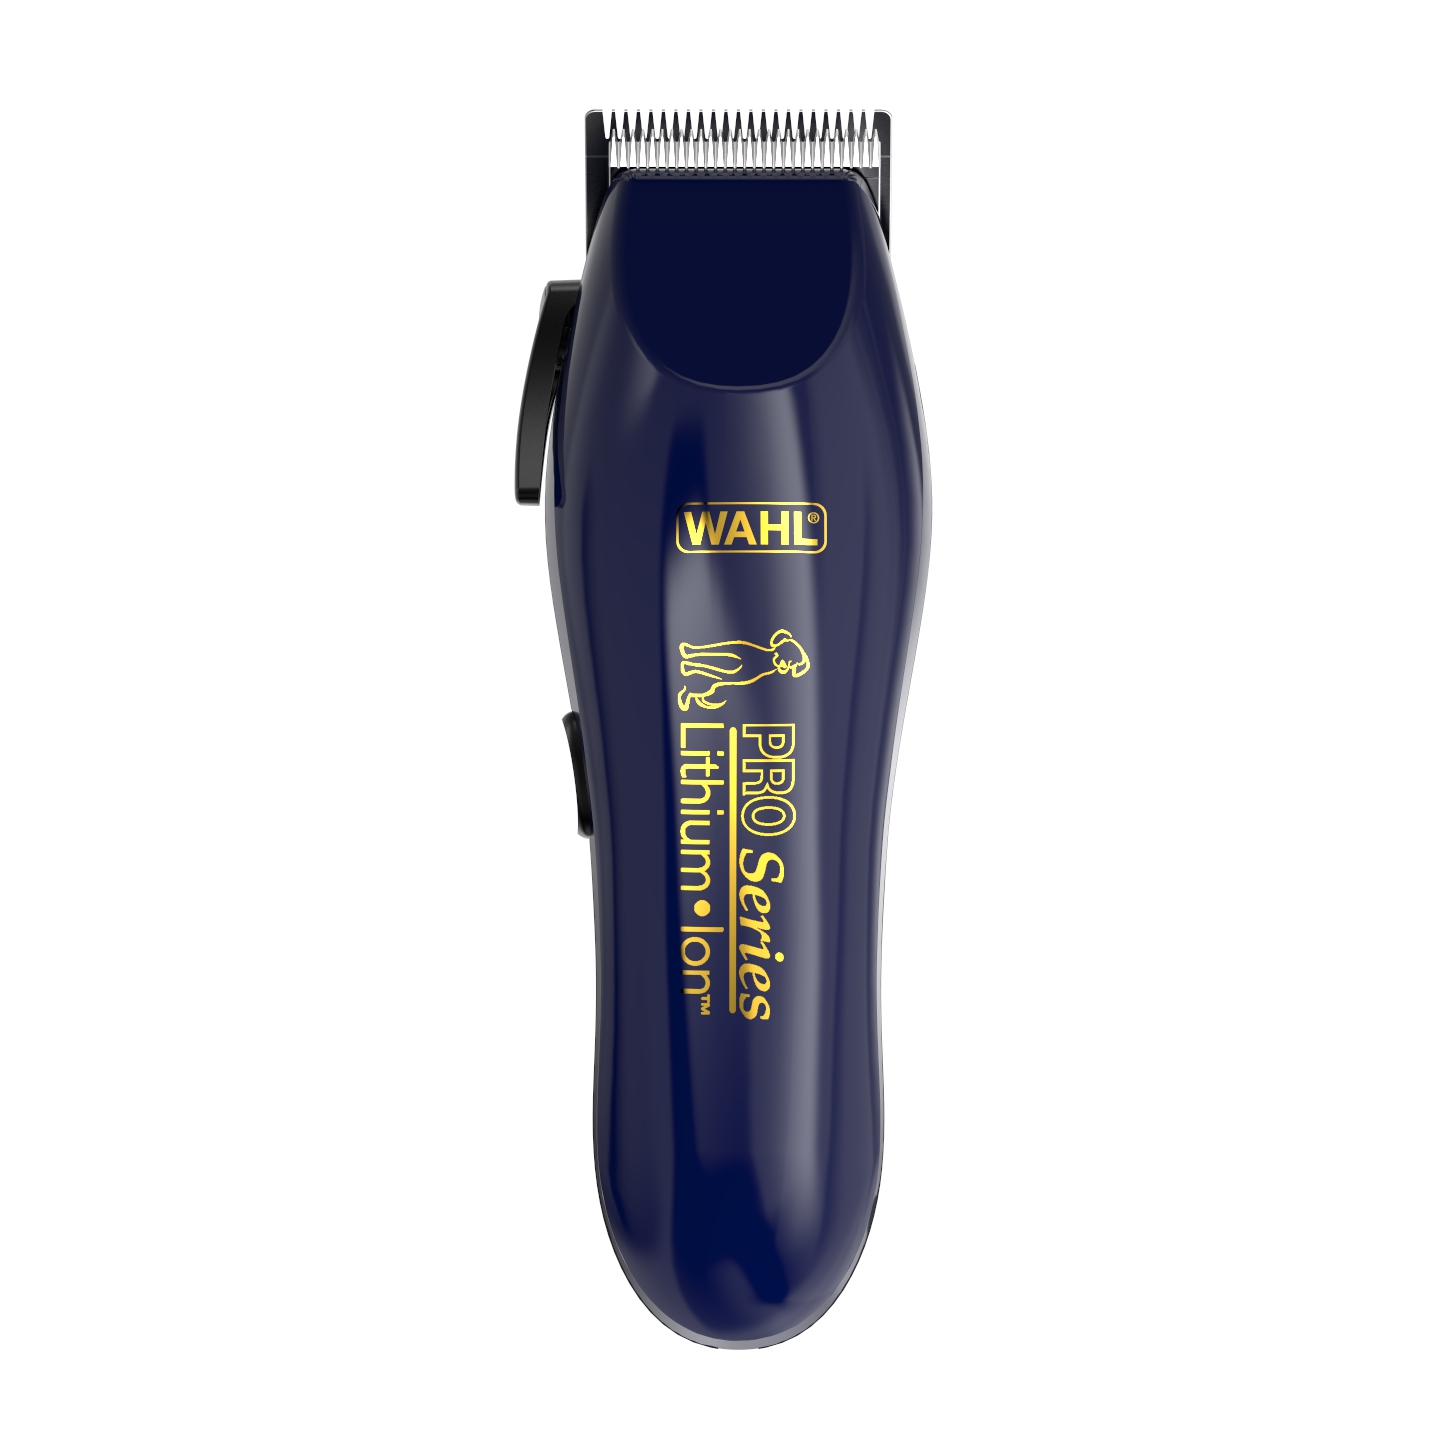 wahl performer rechargeable pet clipper